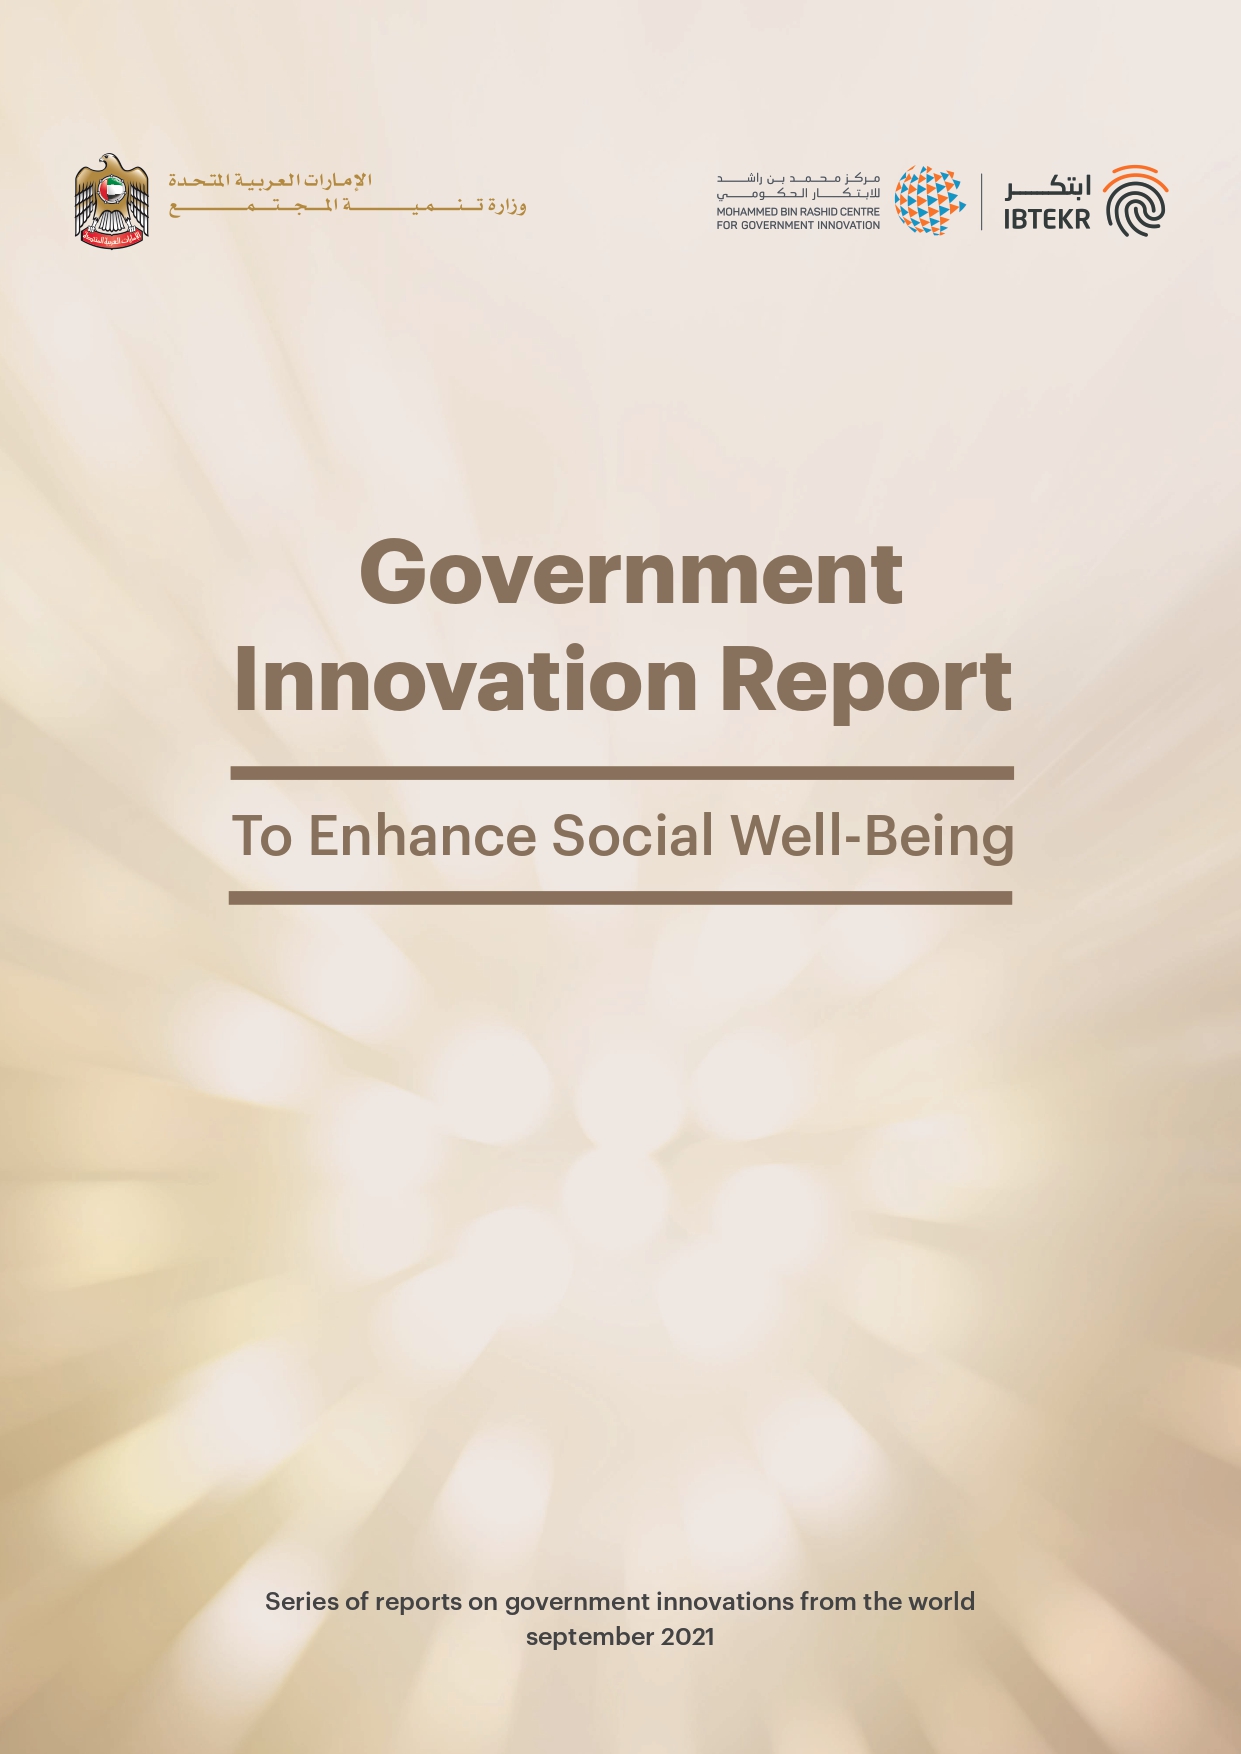 Government Innovation Report to enhance social well-being